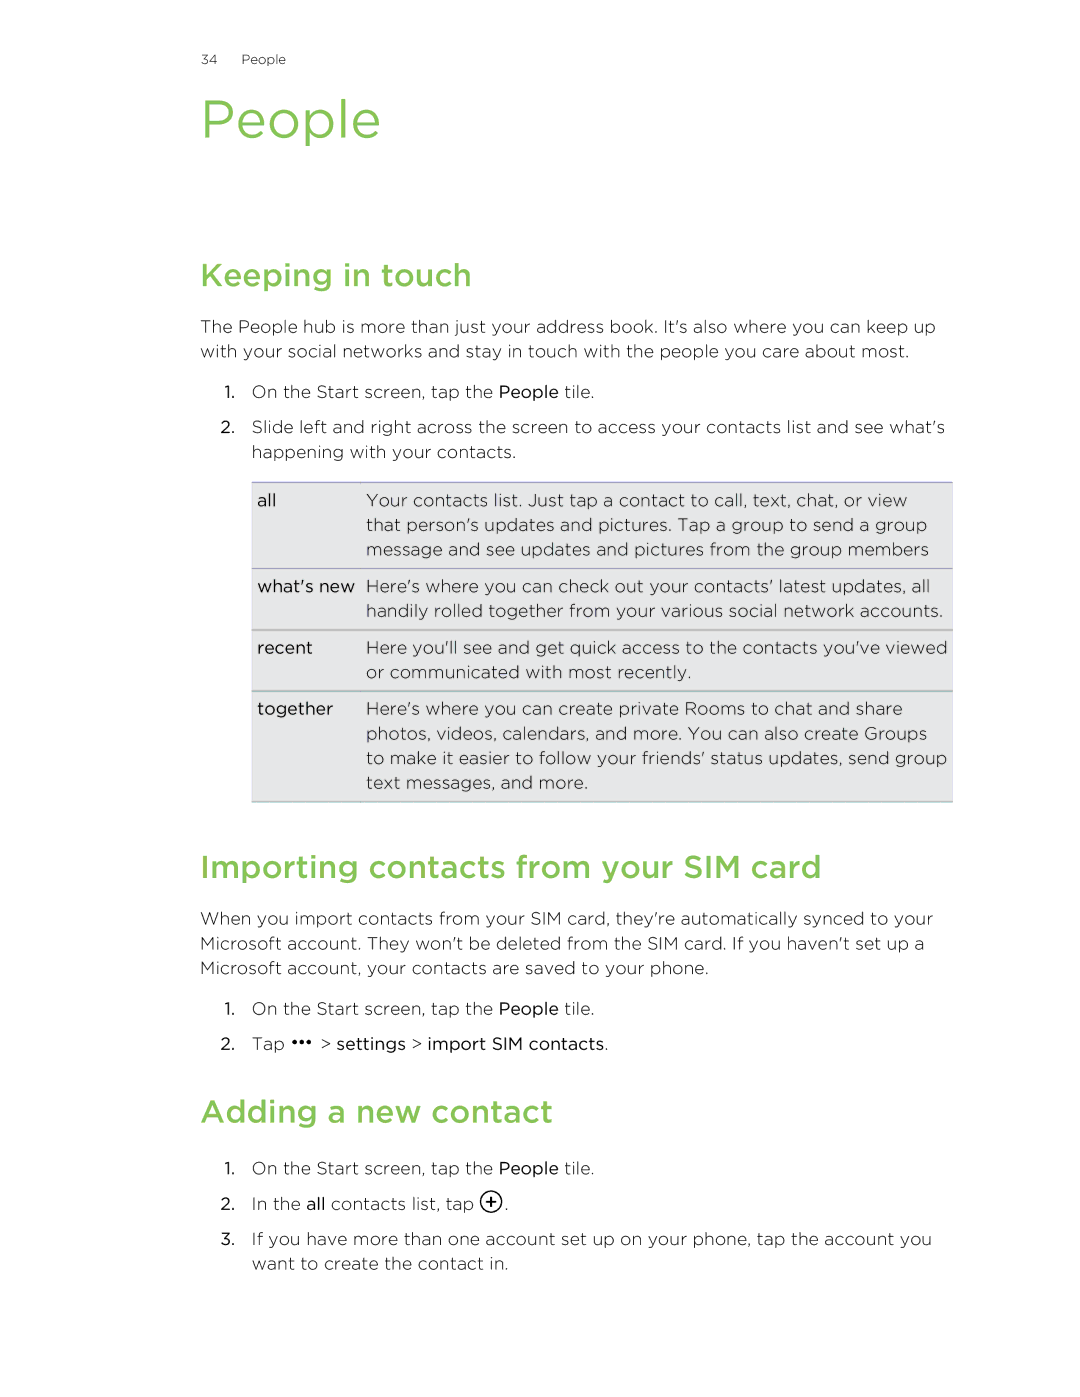 HTC 8X manual People, Keeping in touch, Importing contacts from your SIM card, Adding a new contact 